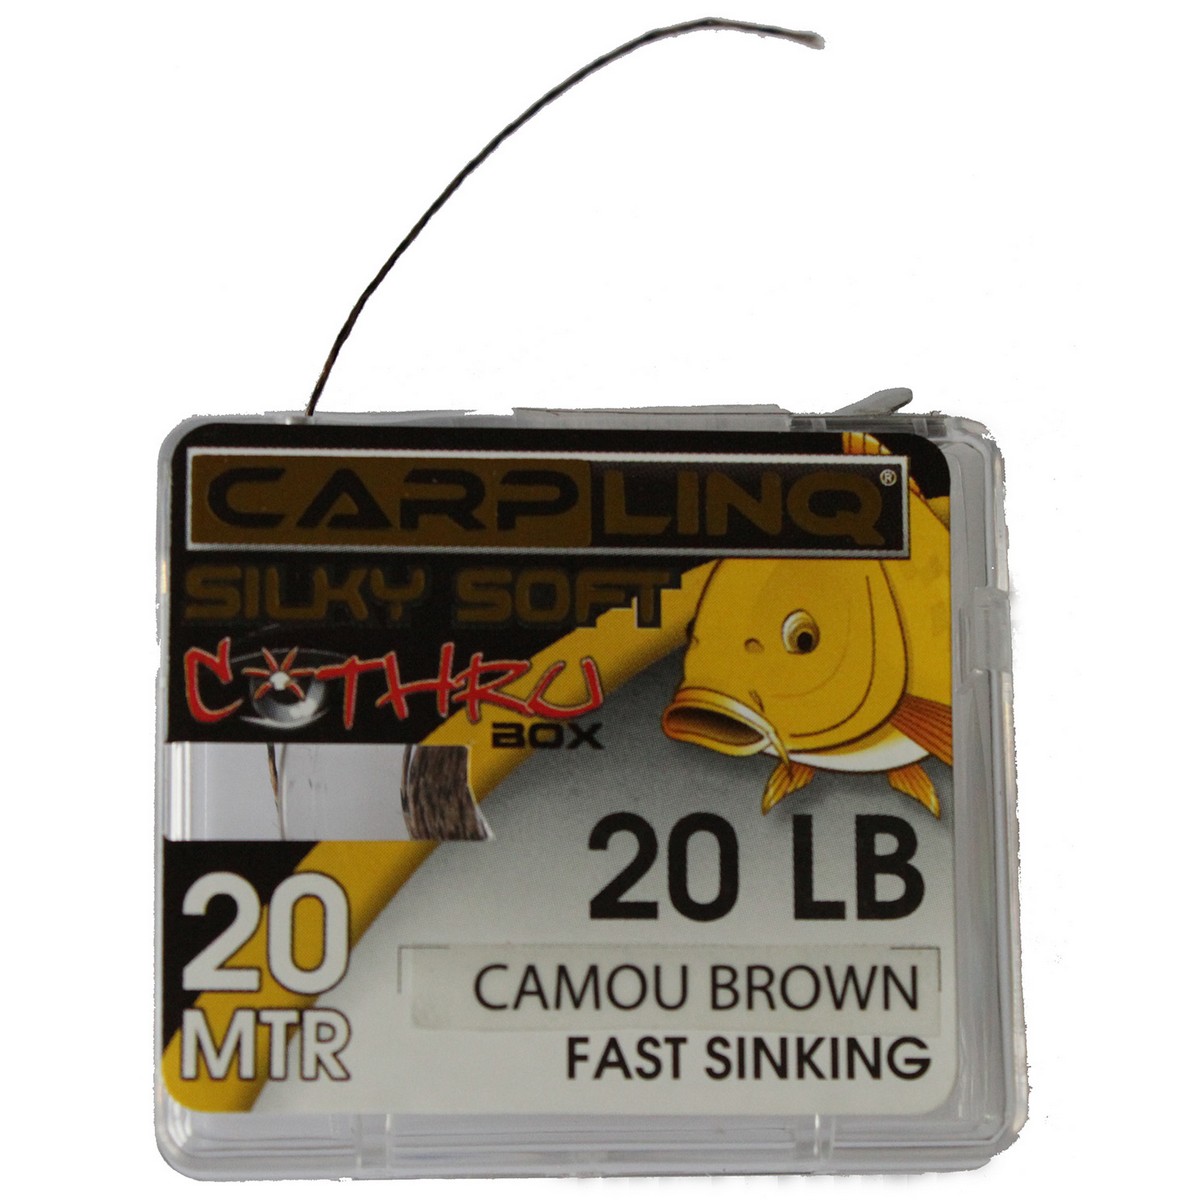 Carp Linq Silky Soft Camou Brown Fast Sinking